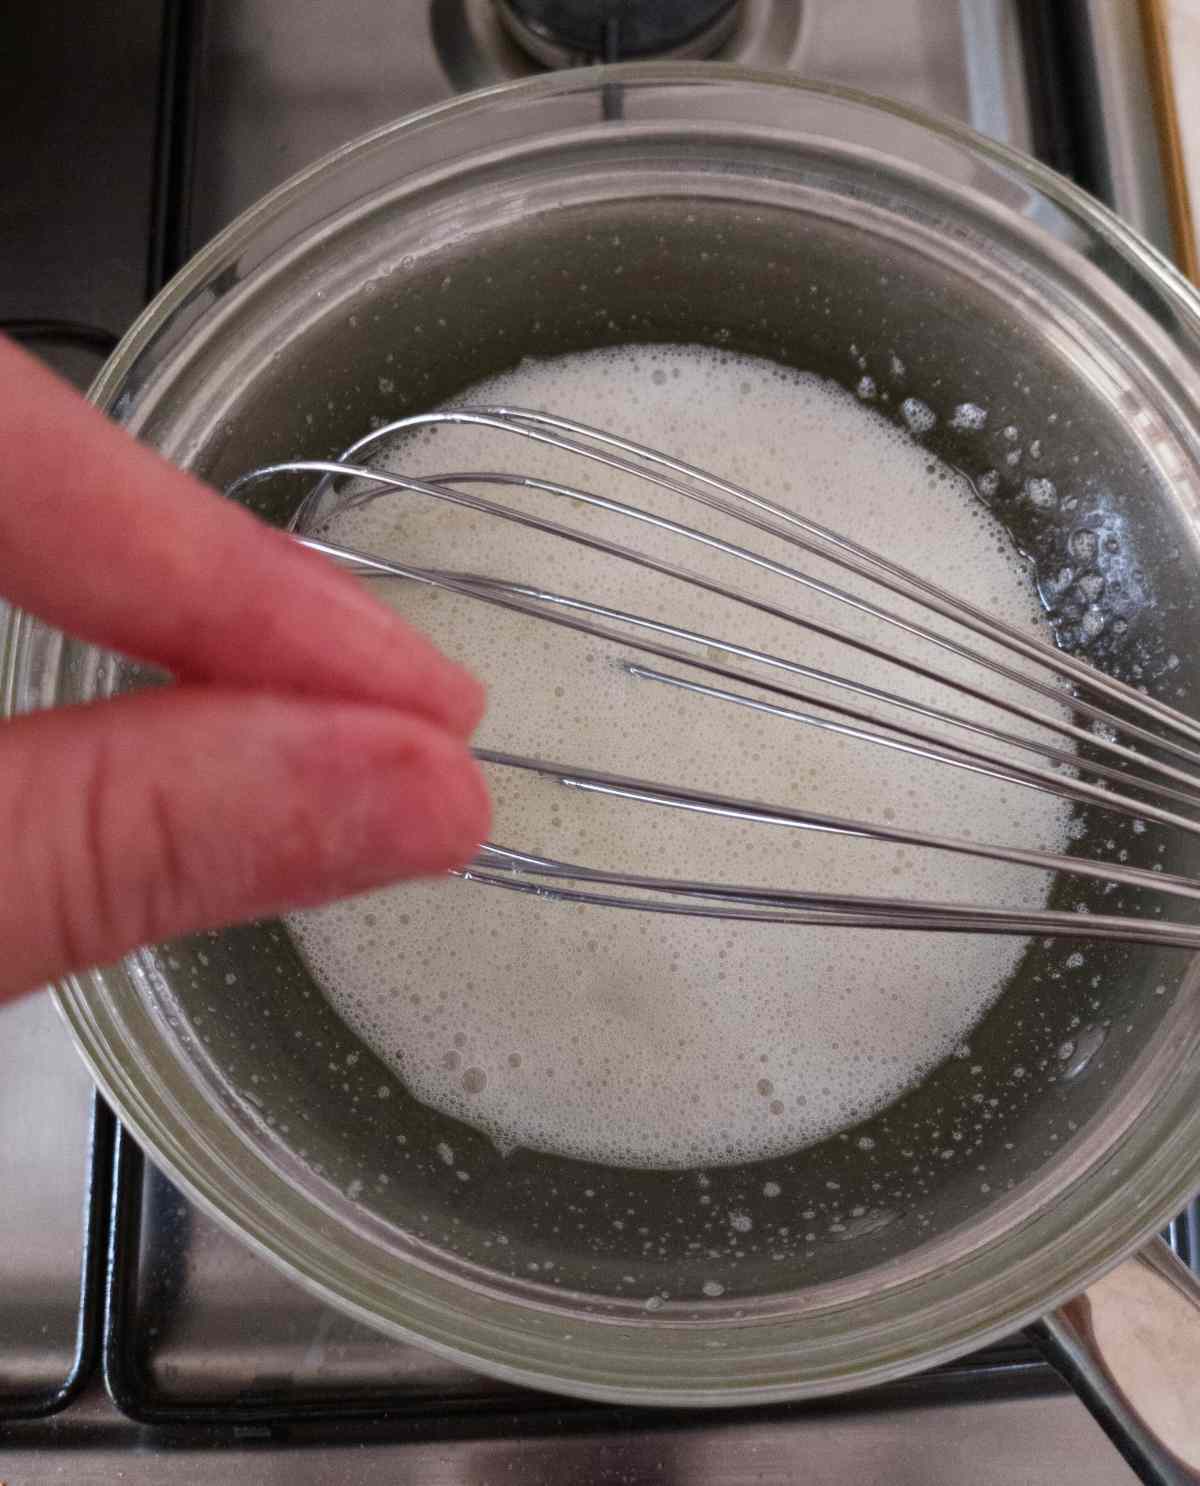 A metal saucepan with egg whites and a whisk on the stove with fingers over it.